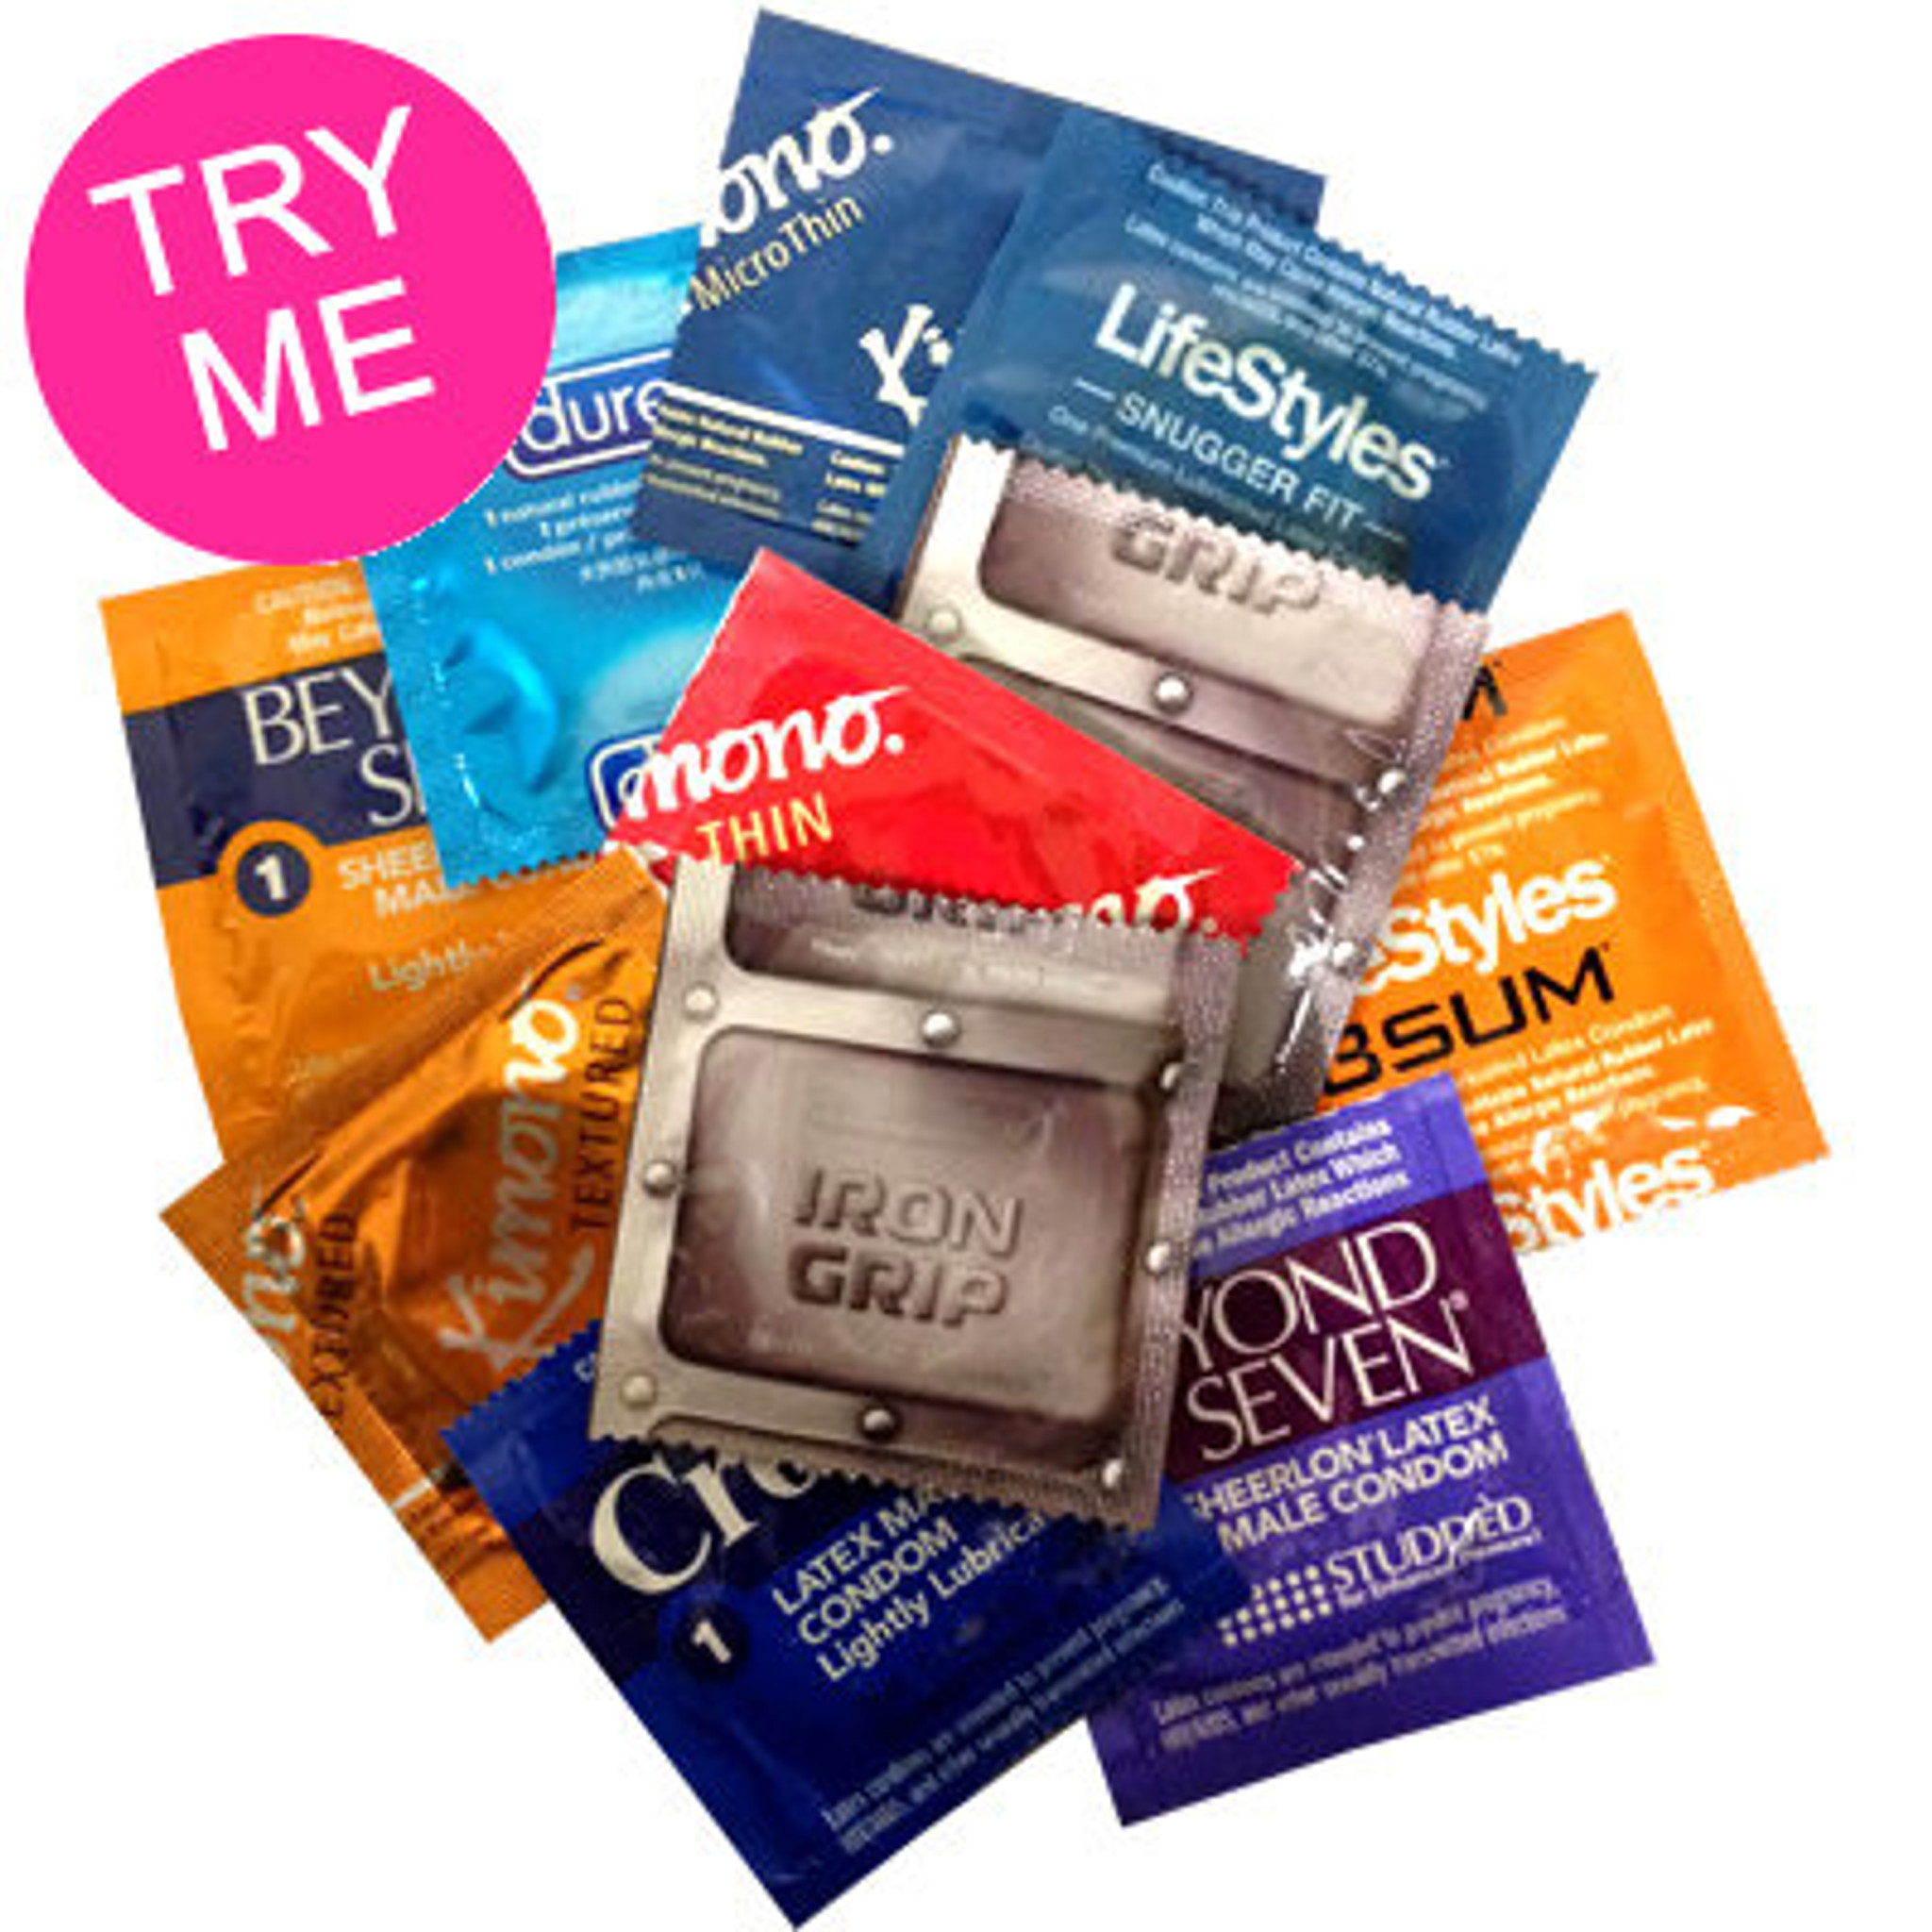 Small Condom Variety Pack Reviews Iron Grip Snugger Fit Smaller Size